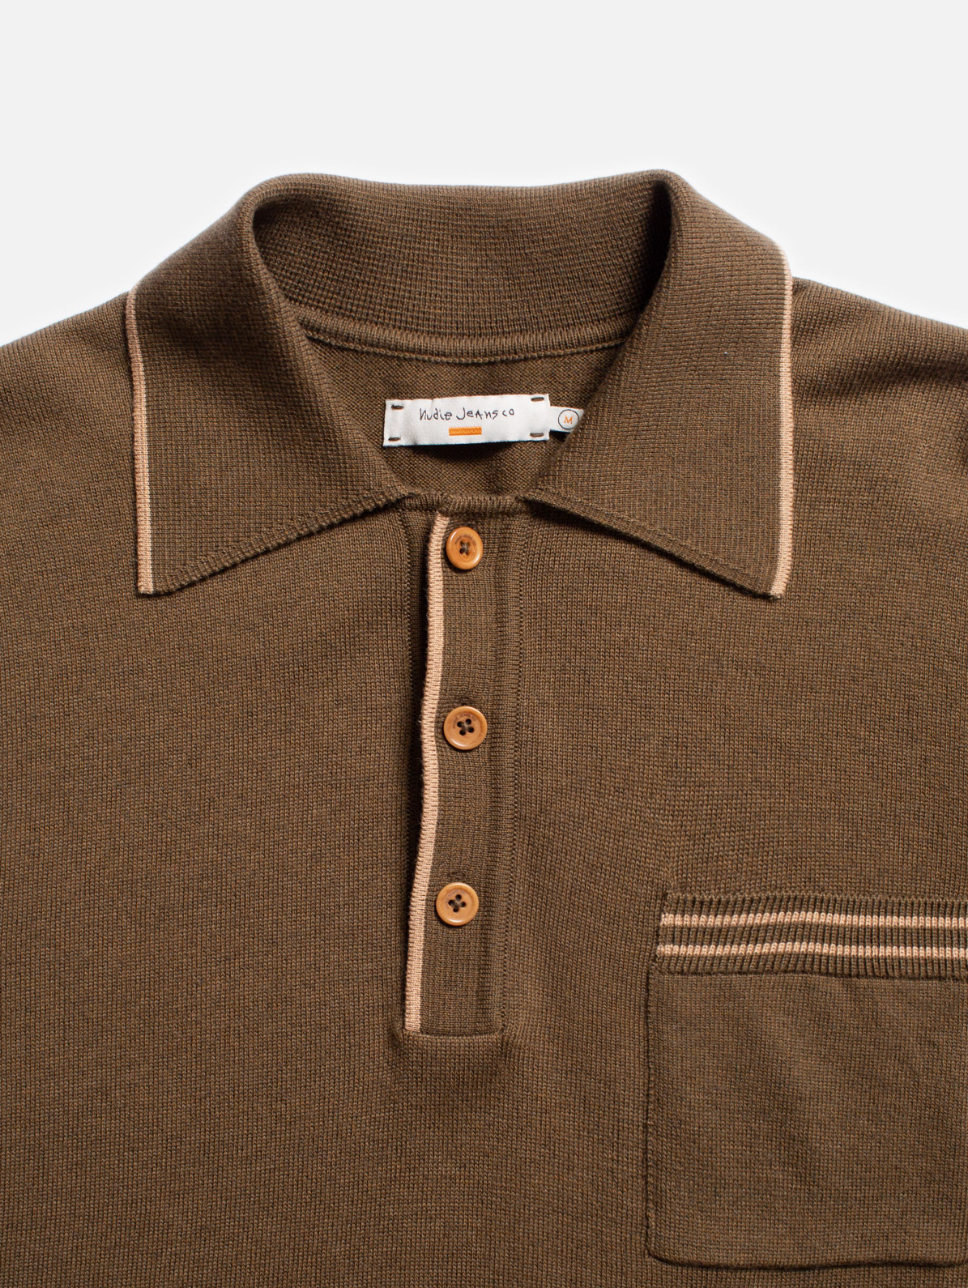 Frippe Polo Club Shirt - Olive